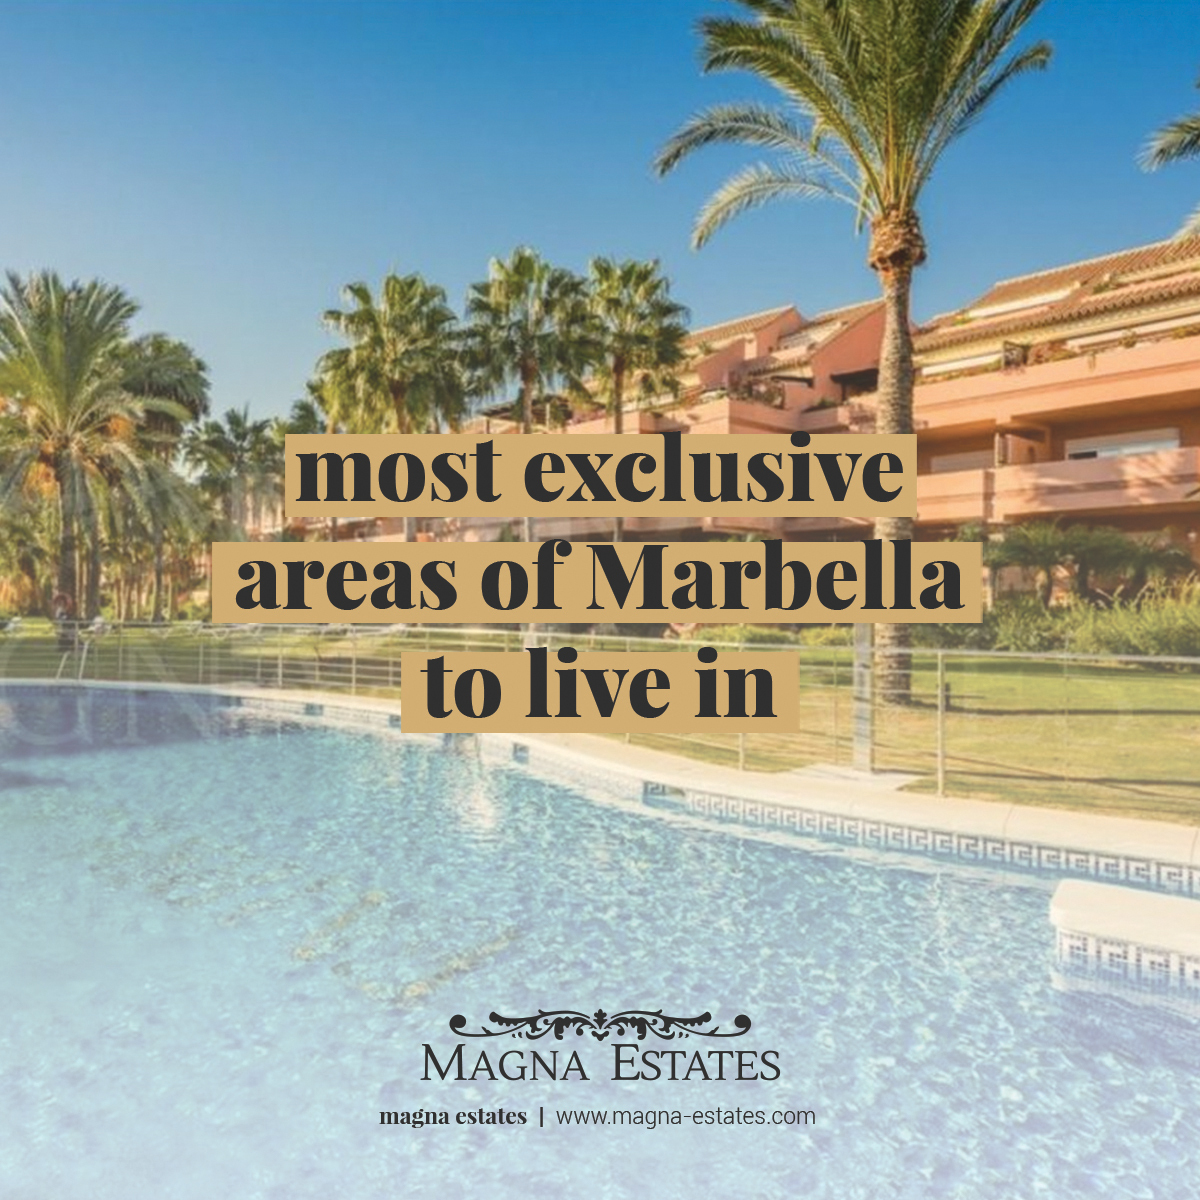 Most Exclusive Areas of Marbella to Live in